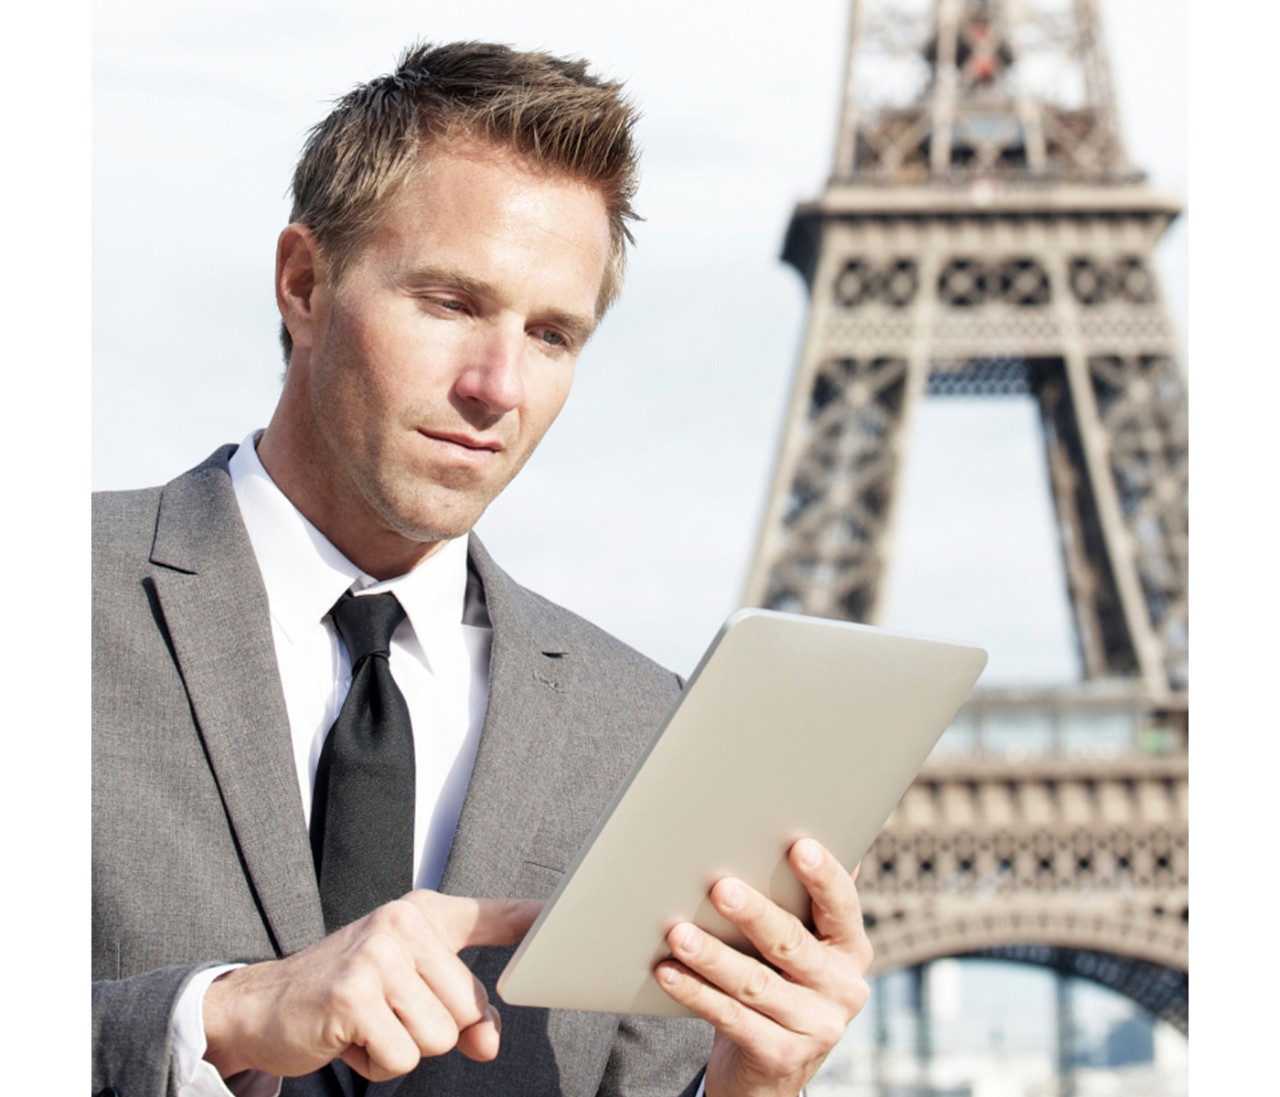 Man on tablet in front of Eiffel Tower